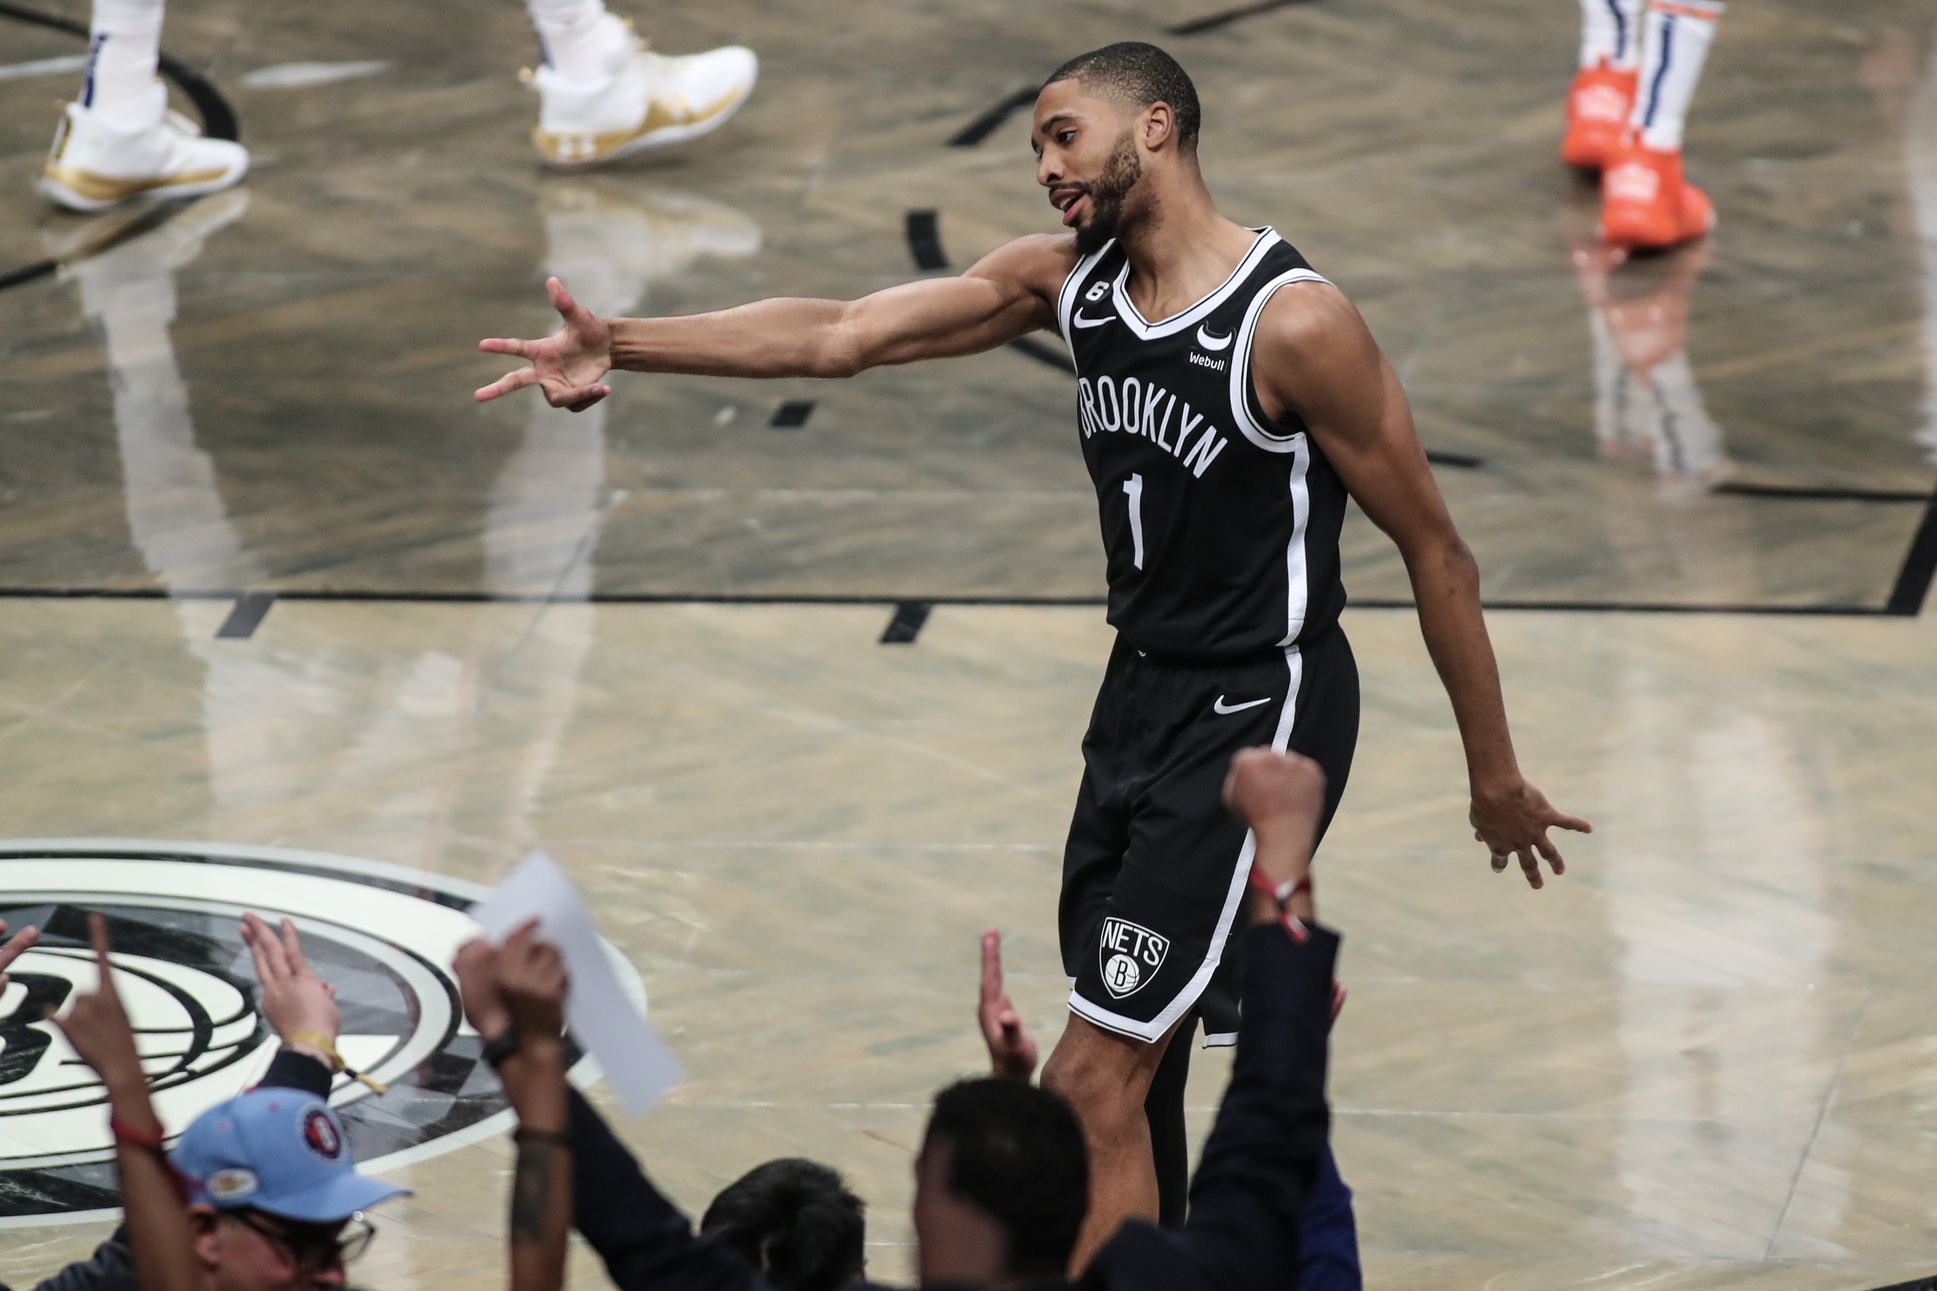 The New York City less established sport teams: the Nets, the Jets